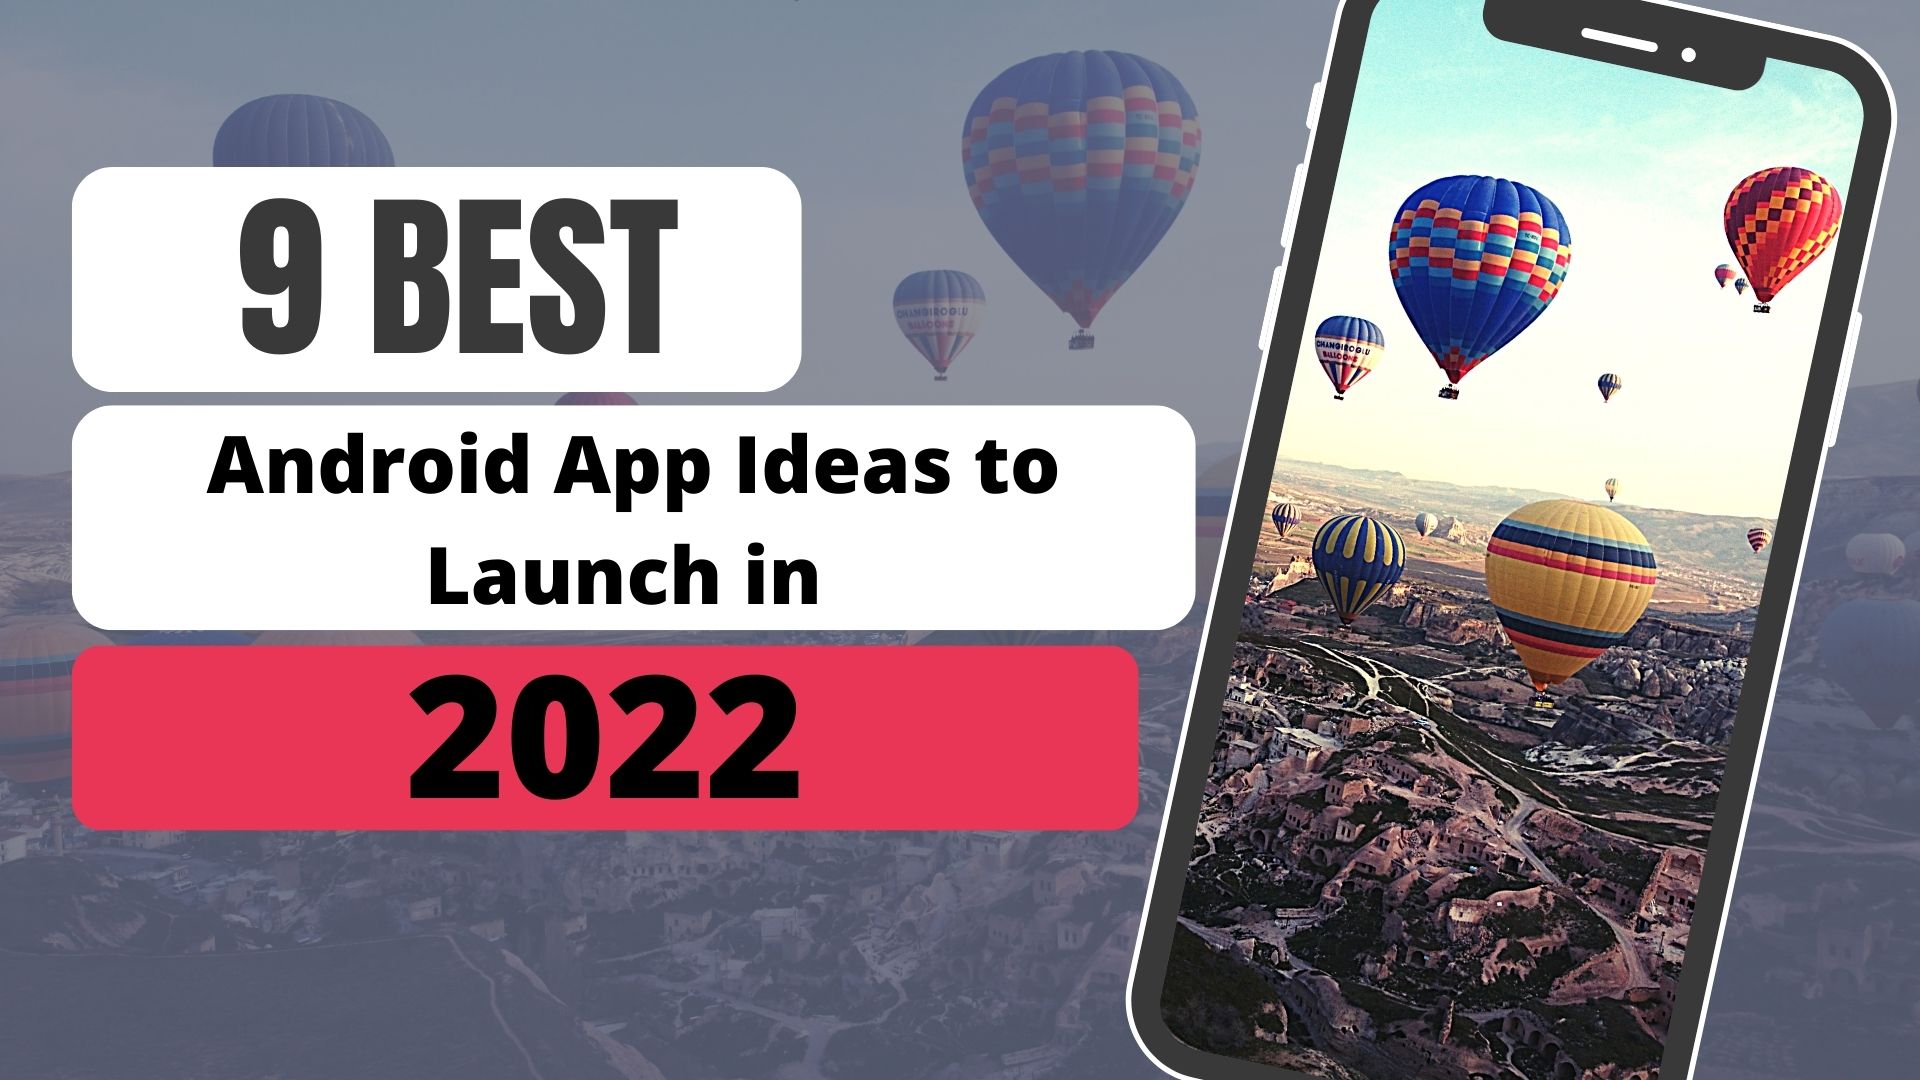 9 Best Android App Ideas to Launch in 2022